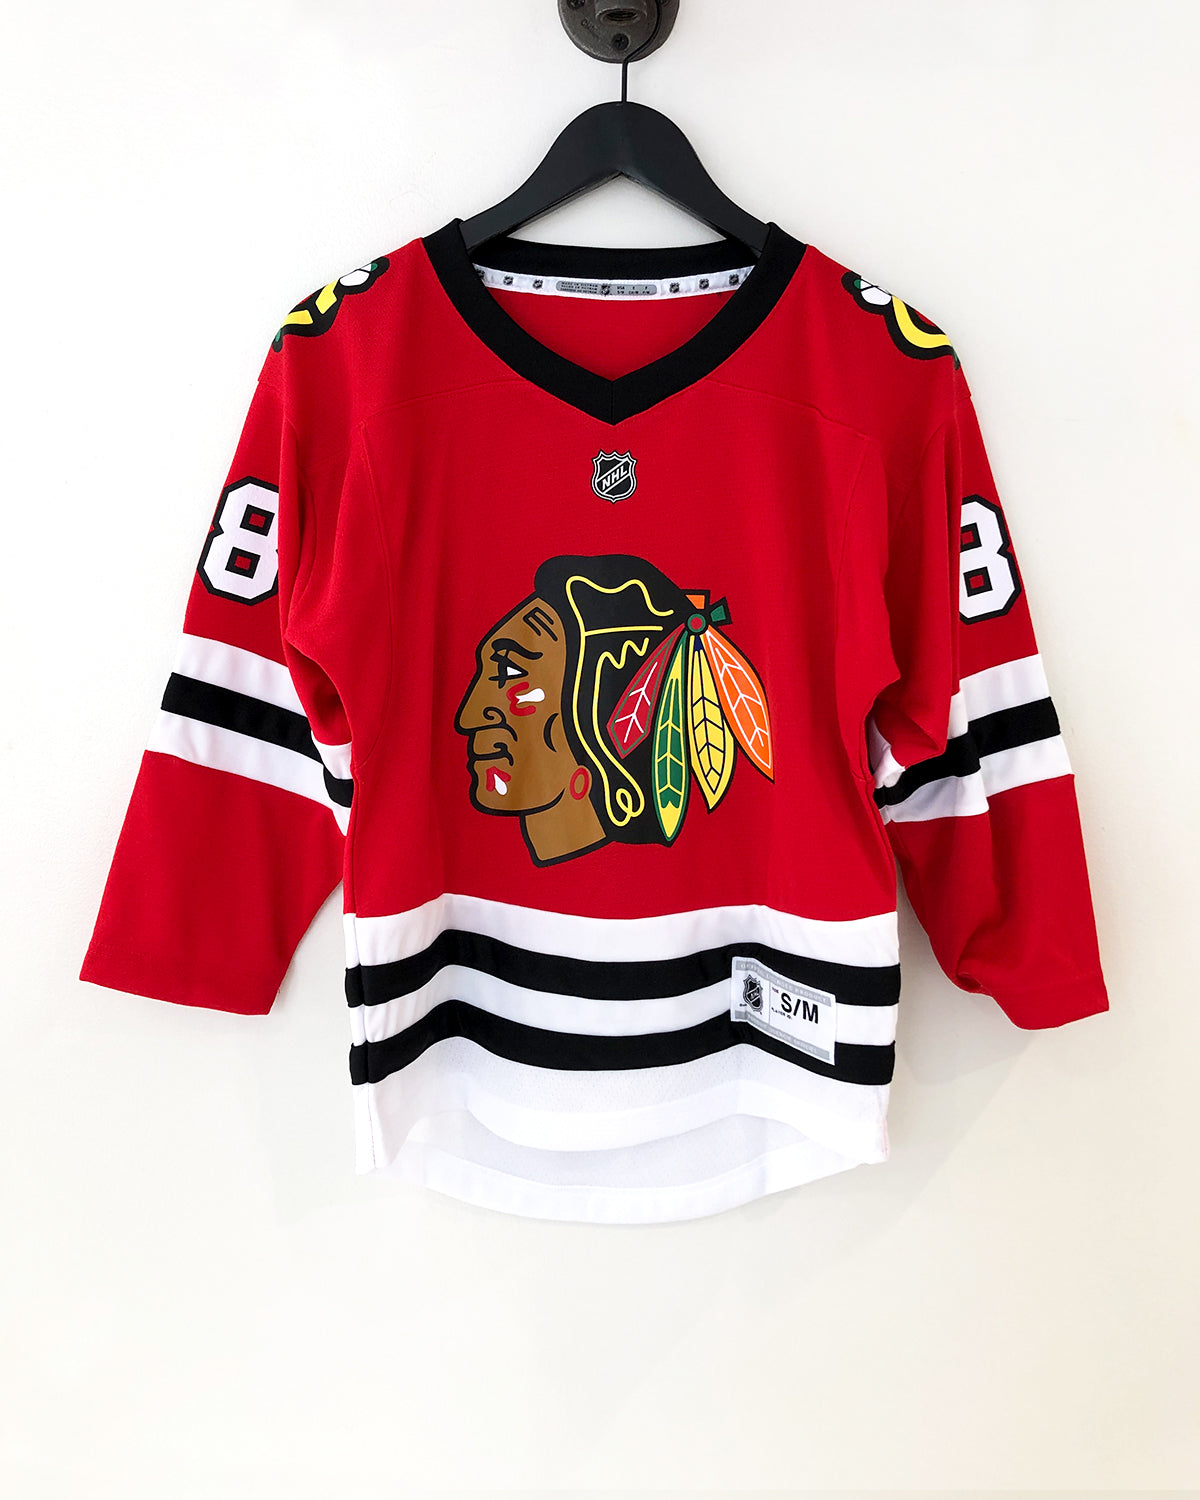  Outerstuff Youth NHL Replica Home-Team Jersey